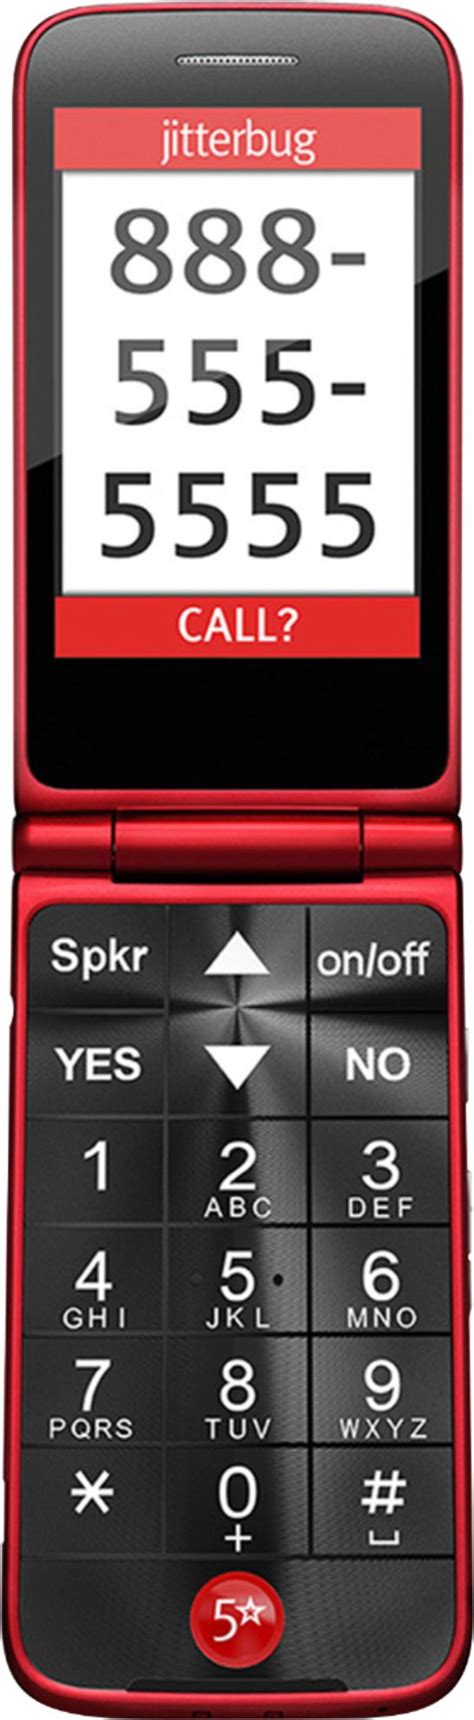 Best Buy Greatcall Jitterbug Flip Prepaid Cell Phone For Seniors Red